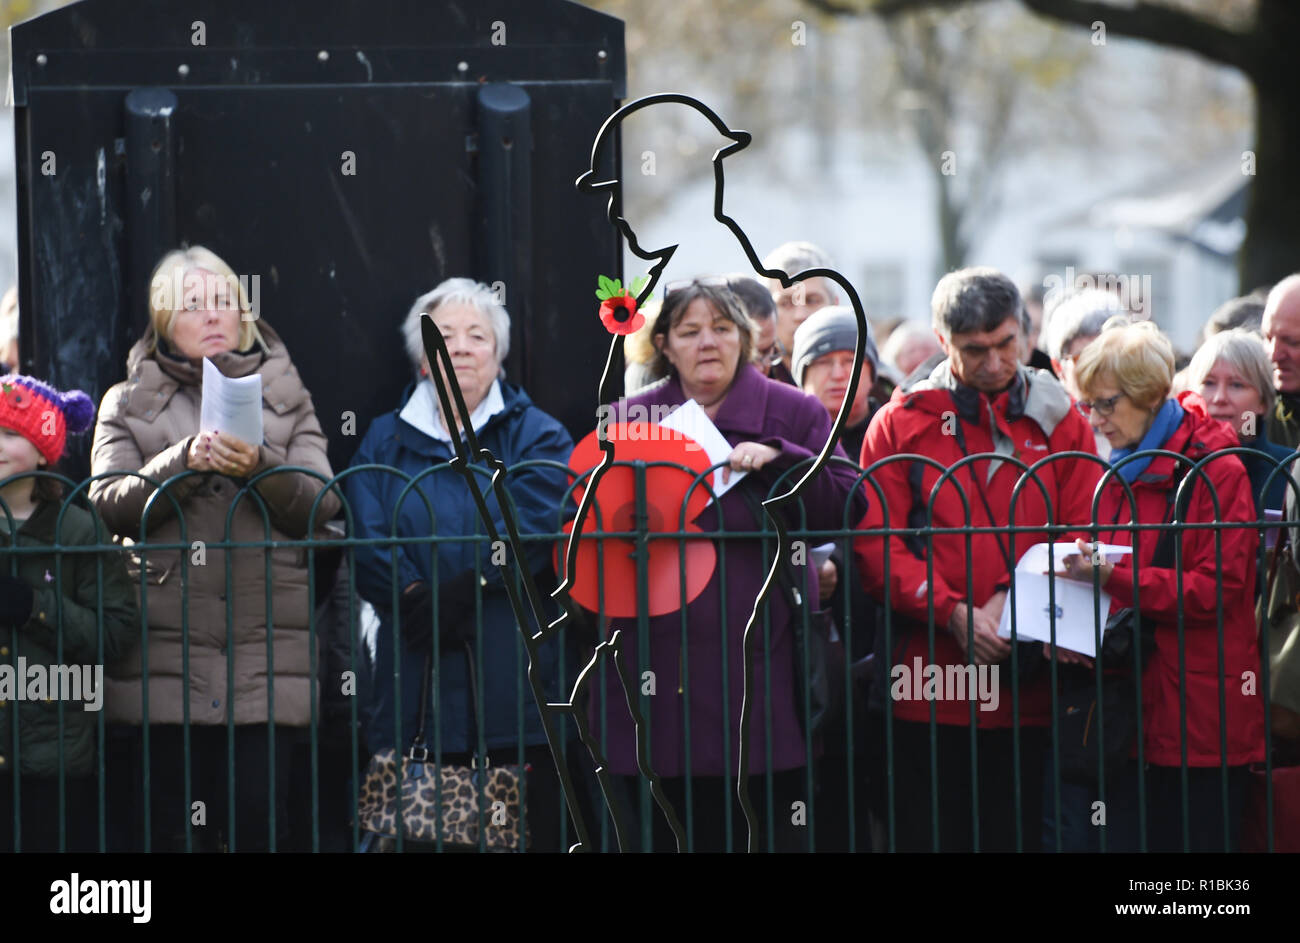 Brighton UK 11th November 2018 -Thousands turned out for the Act of Remembrance Service held at Brighton war memorial . It is the 100 year anniversary today of the ending of World War One on the 11th November 1918 . Photograph taken by Simon Dack Credit: Simon Dack/Alamy Live News Stock Photo